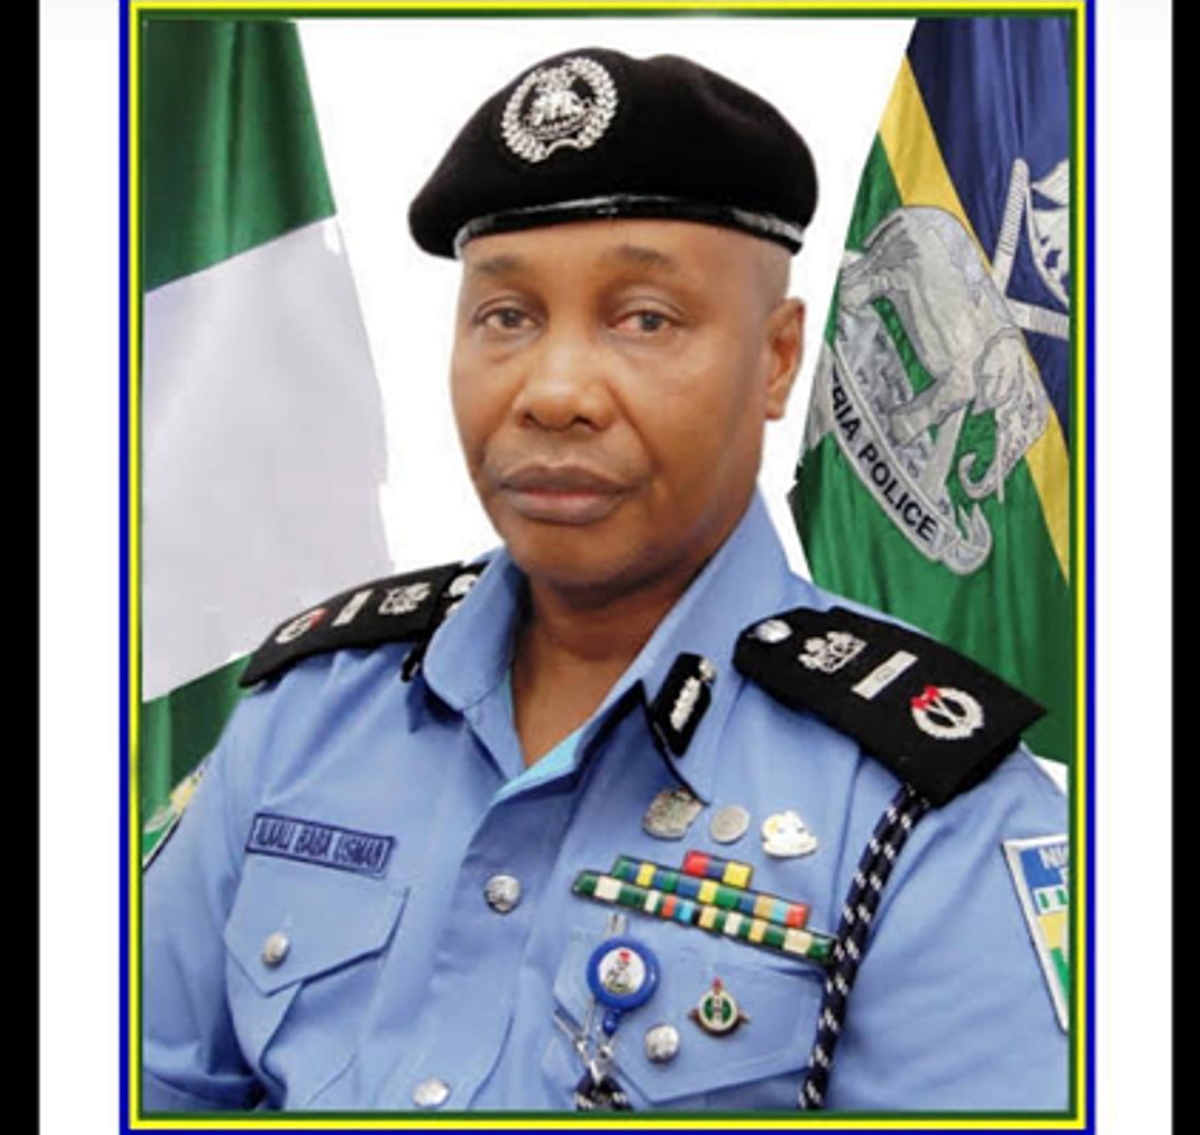 2023 GENERAL ELECTIONS: IGP ORDERS RESTRICTION OF MOVEMENT ON ELECTION DAY